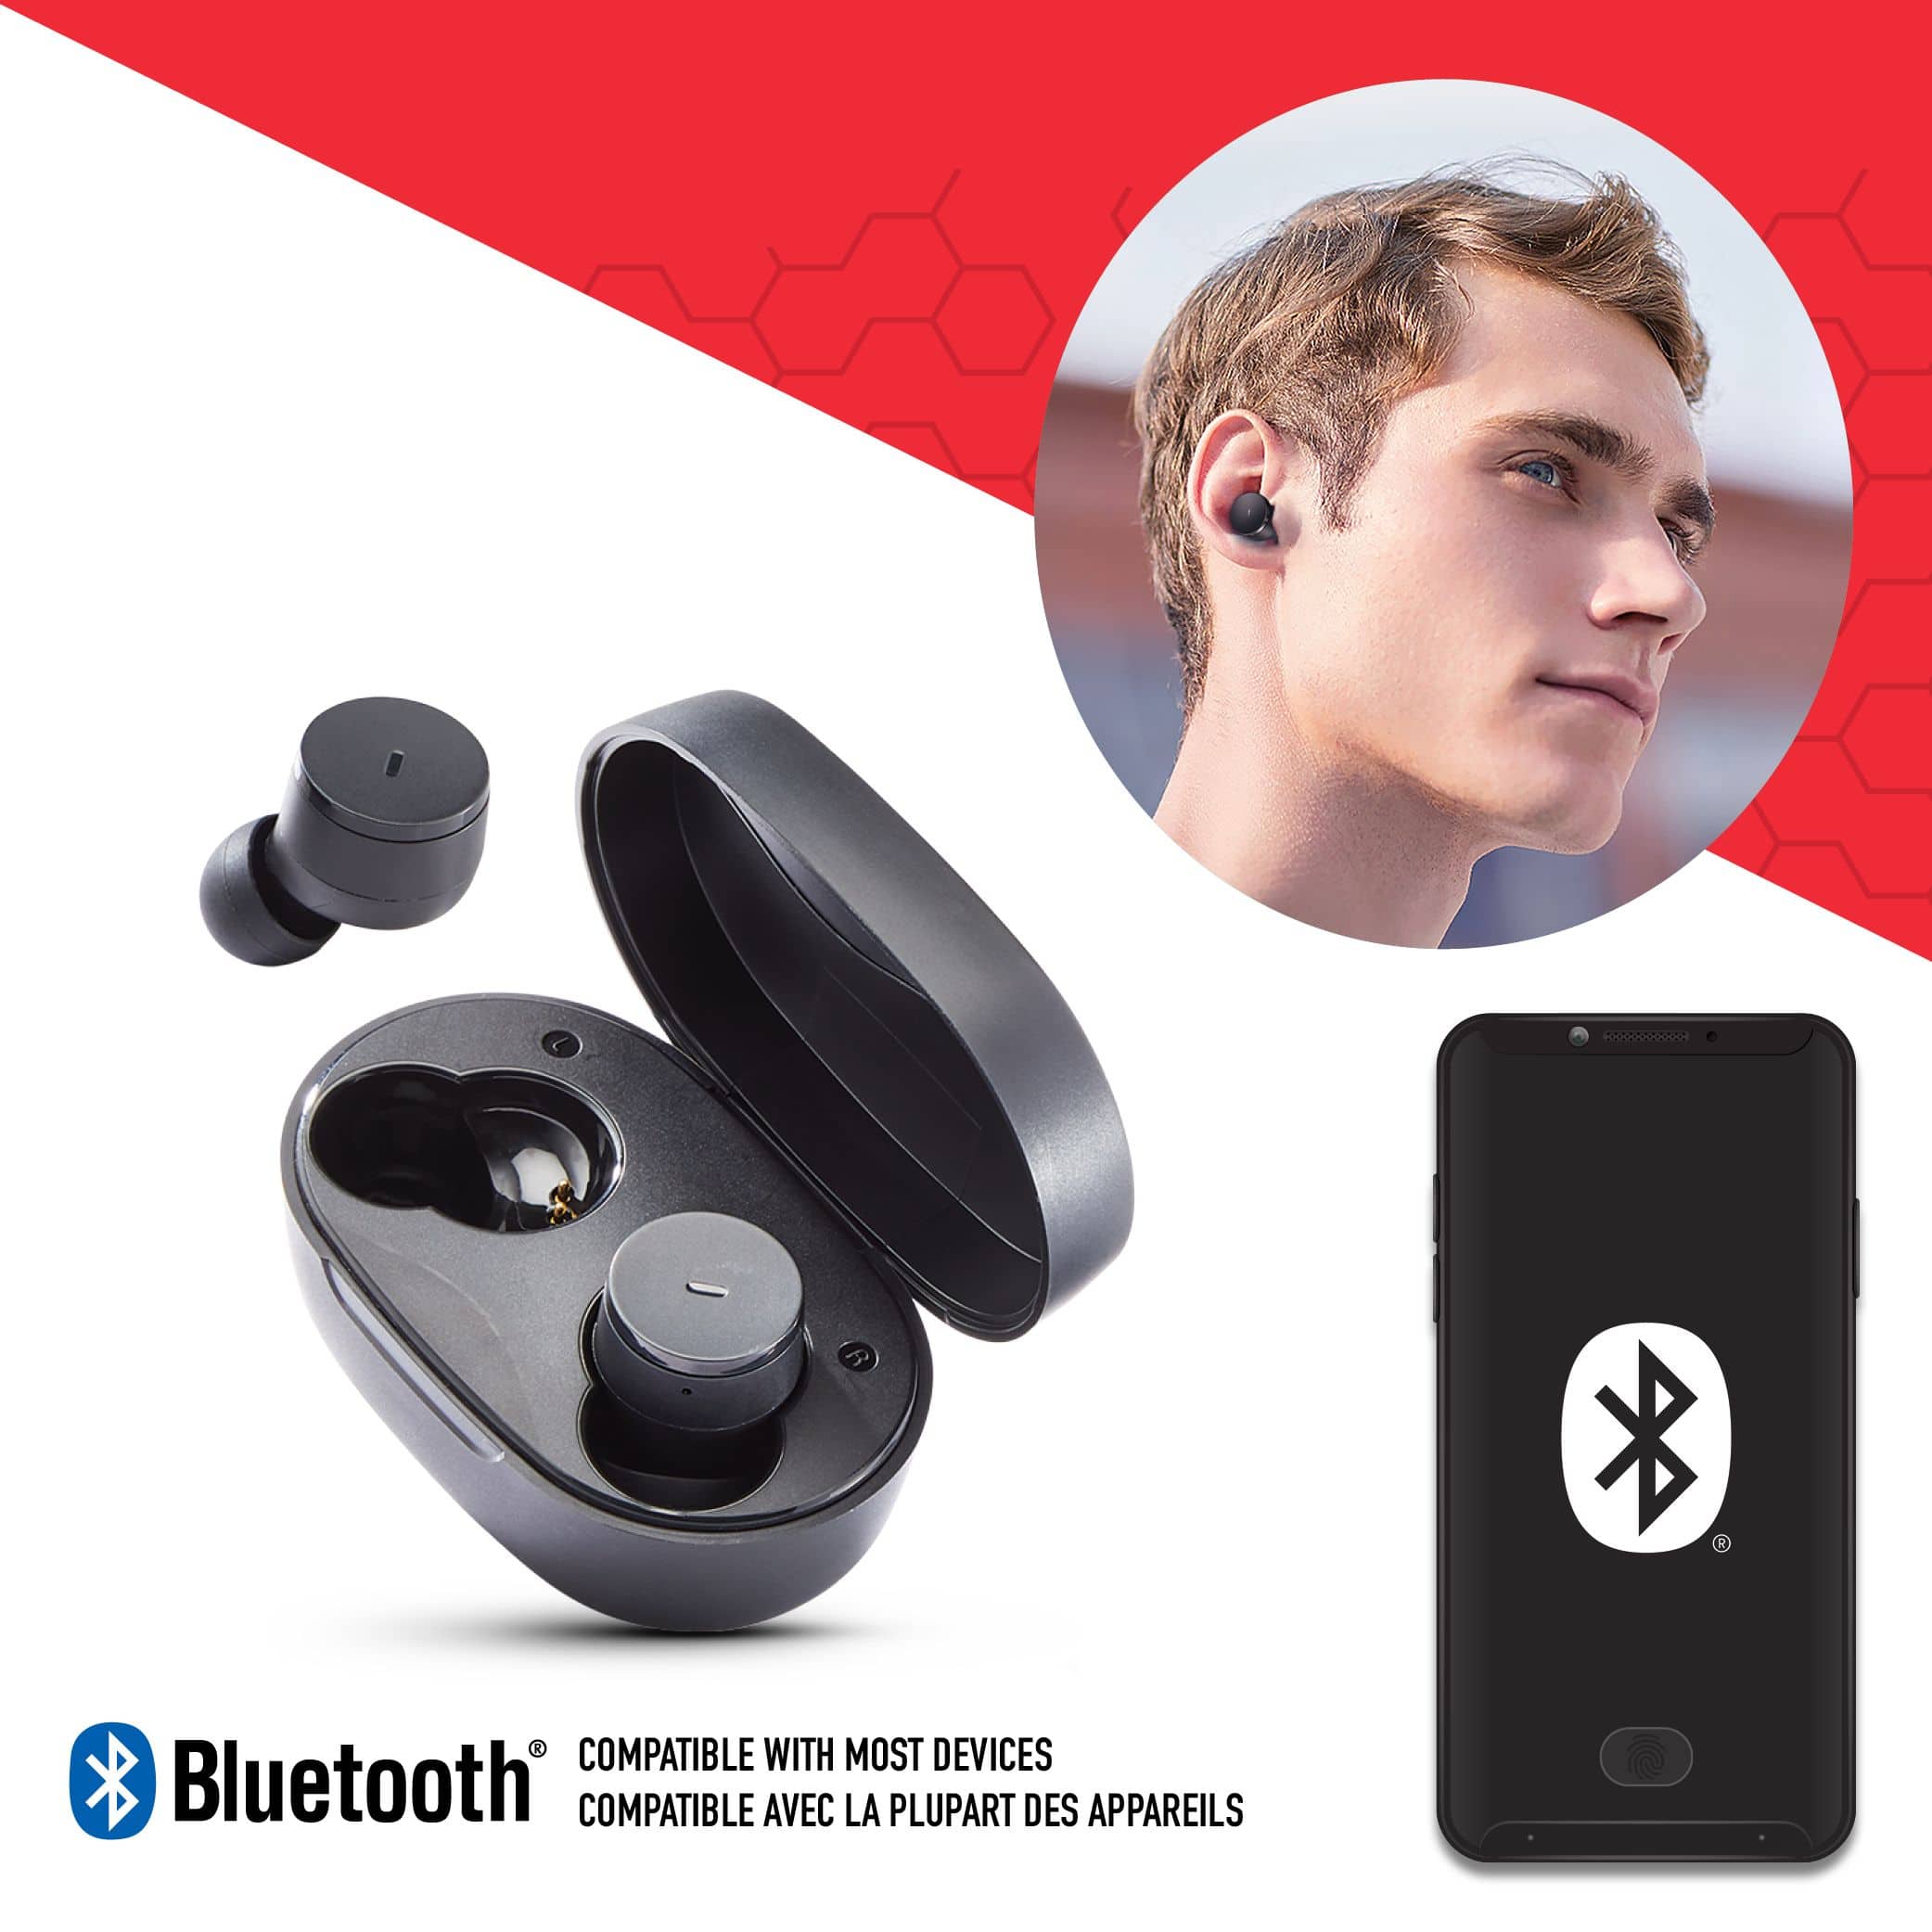 Bluehive BlueBuds True Wireless Earbuds, with Charging Case and